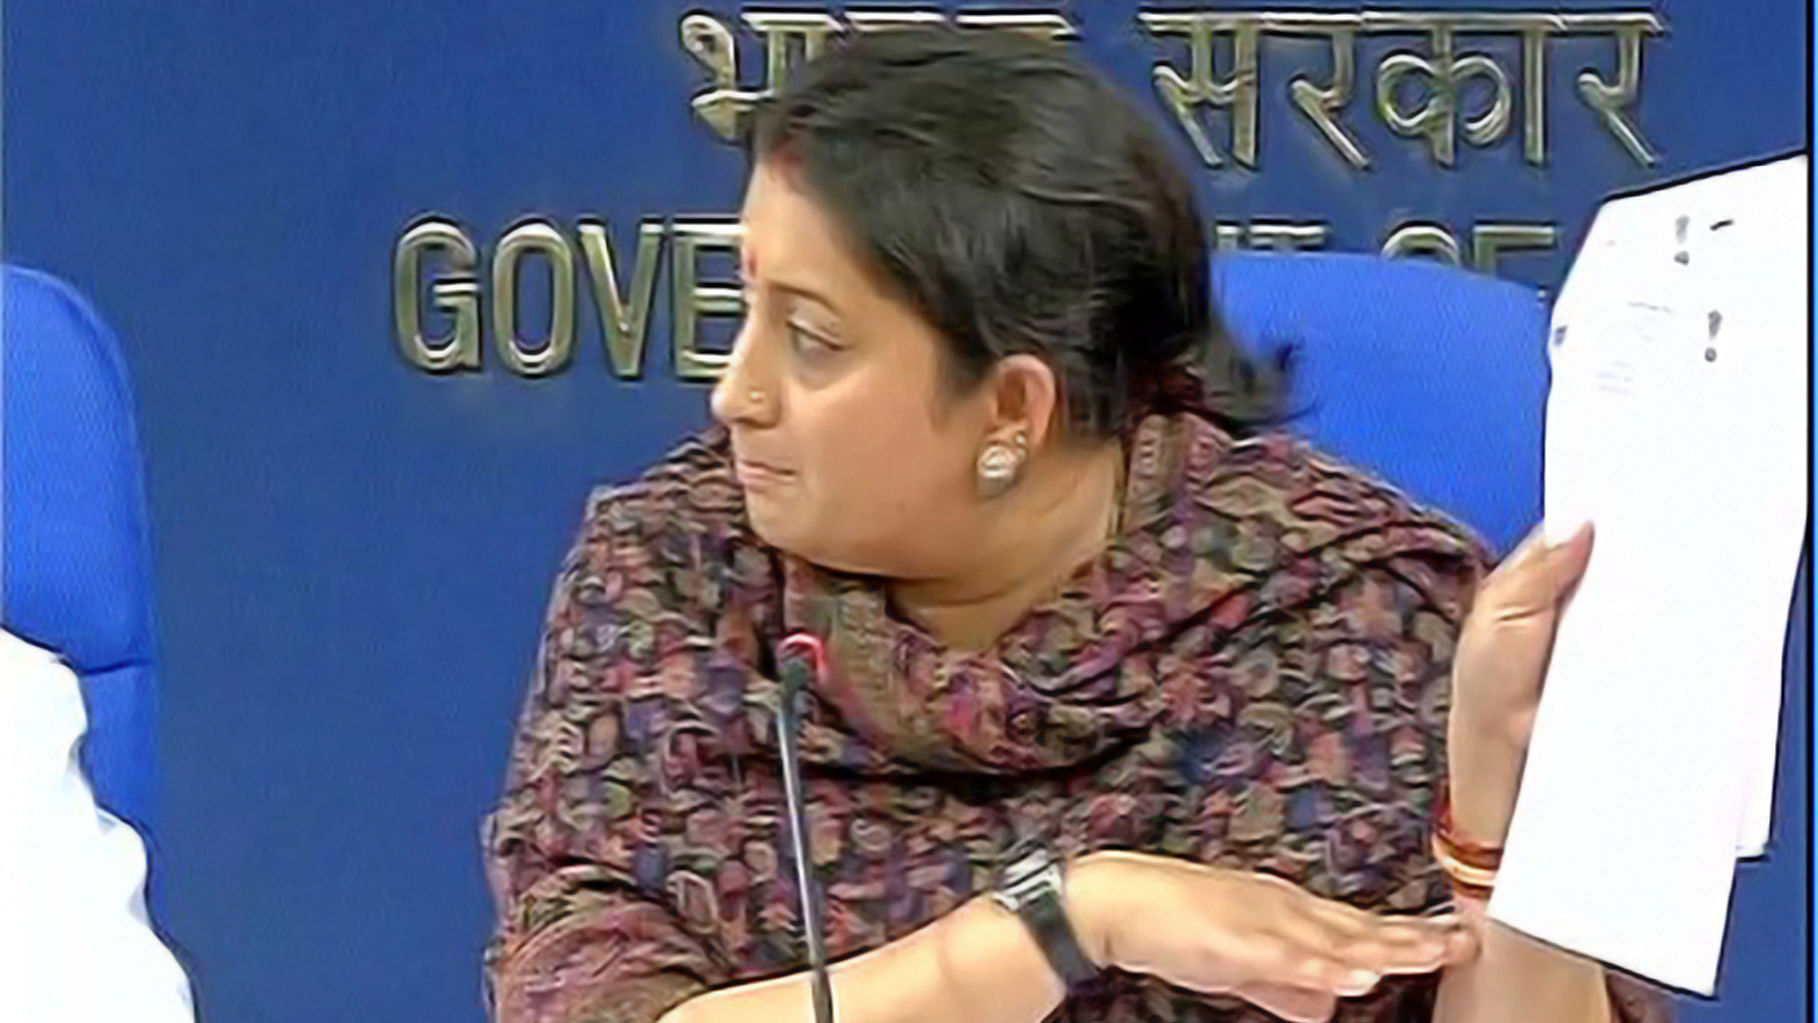 Smriti Irani, Union HRD Minister, addressed Rohith Vemula’s suicide in a press conference held on Wednesday. (Photo courtesy: ANI)